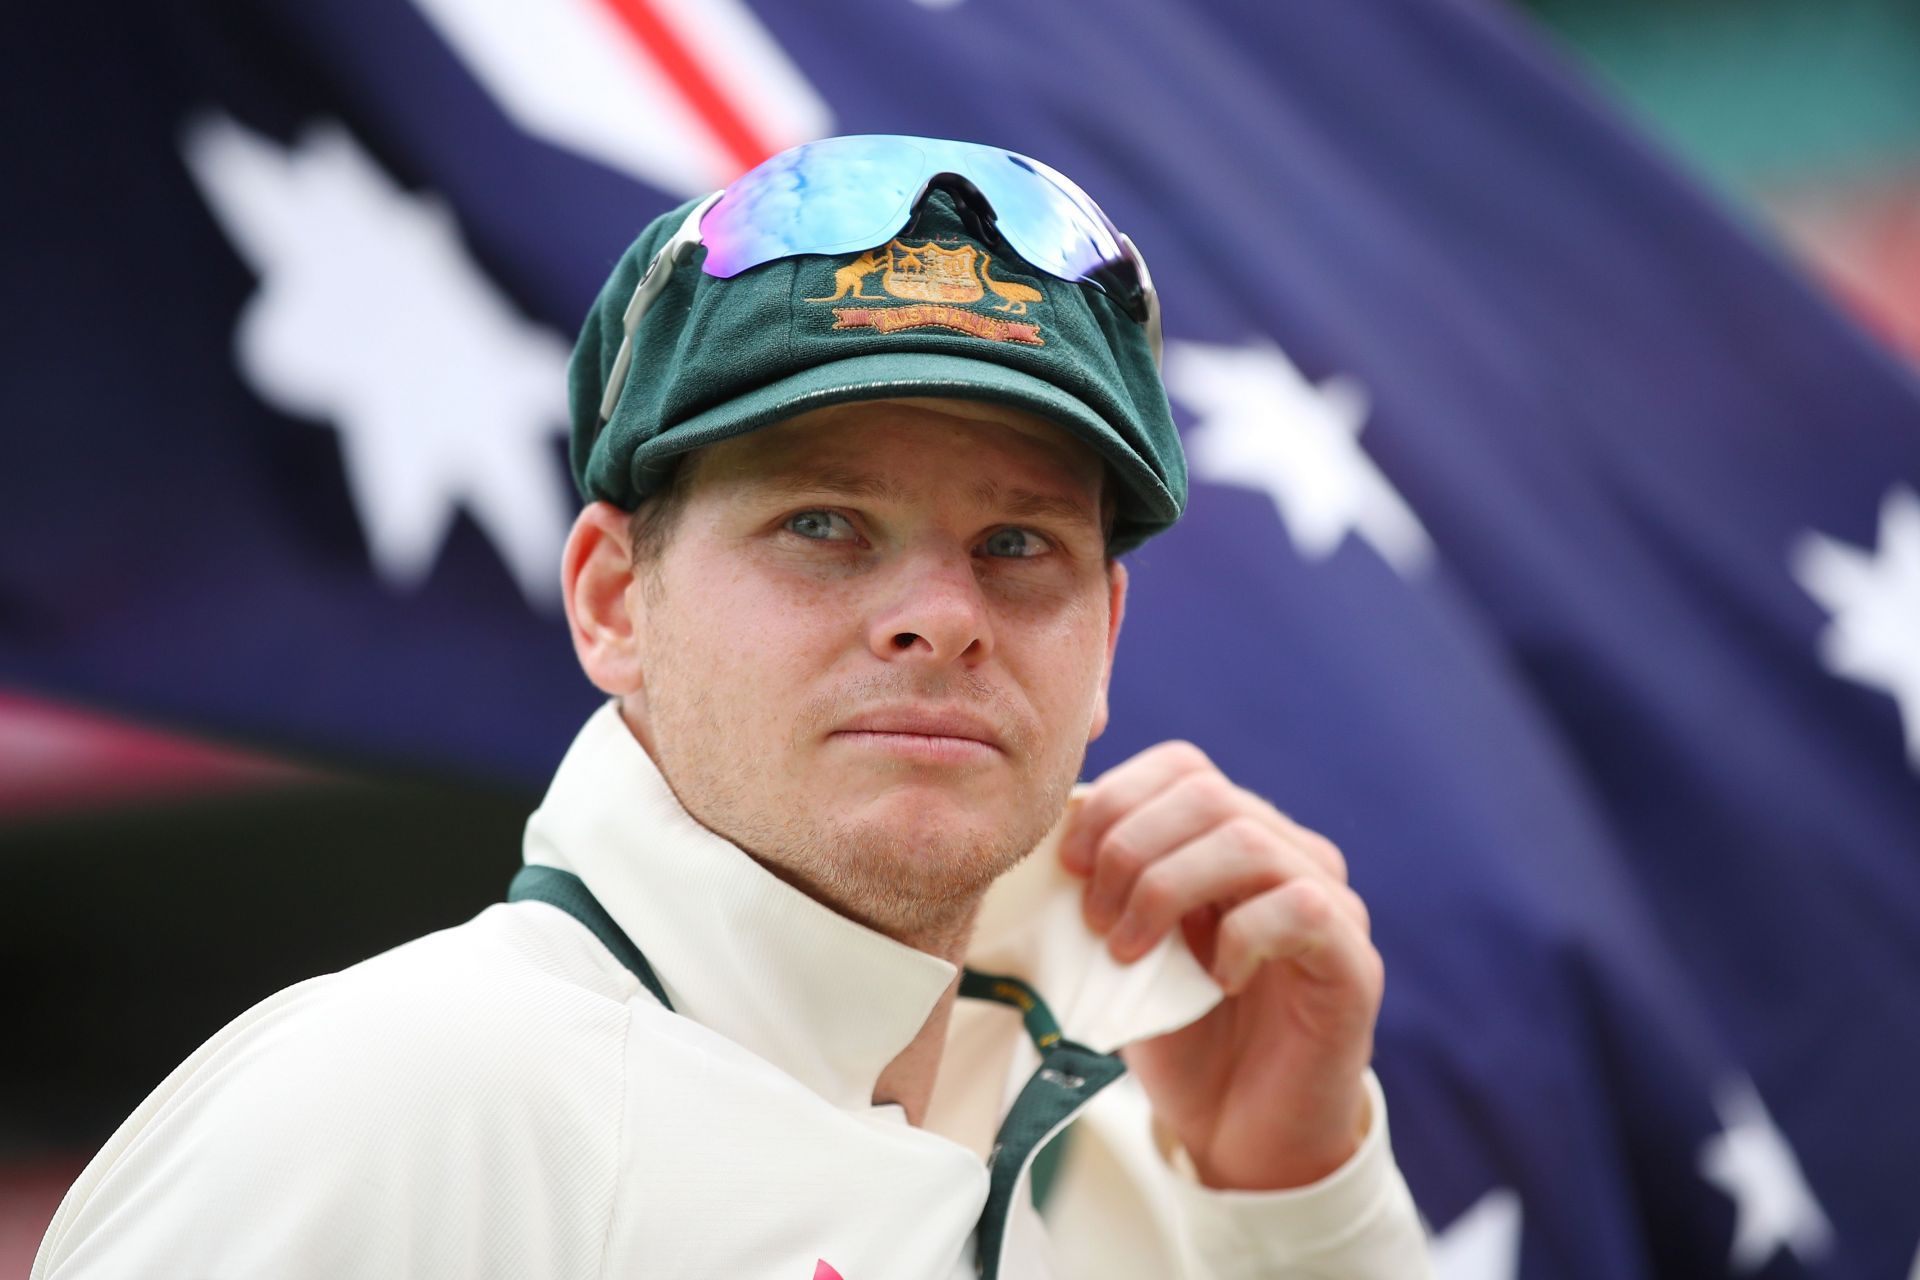 Steve Smith has lost his second spot in the ICC Test Rankings for Batters